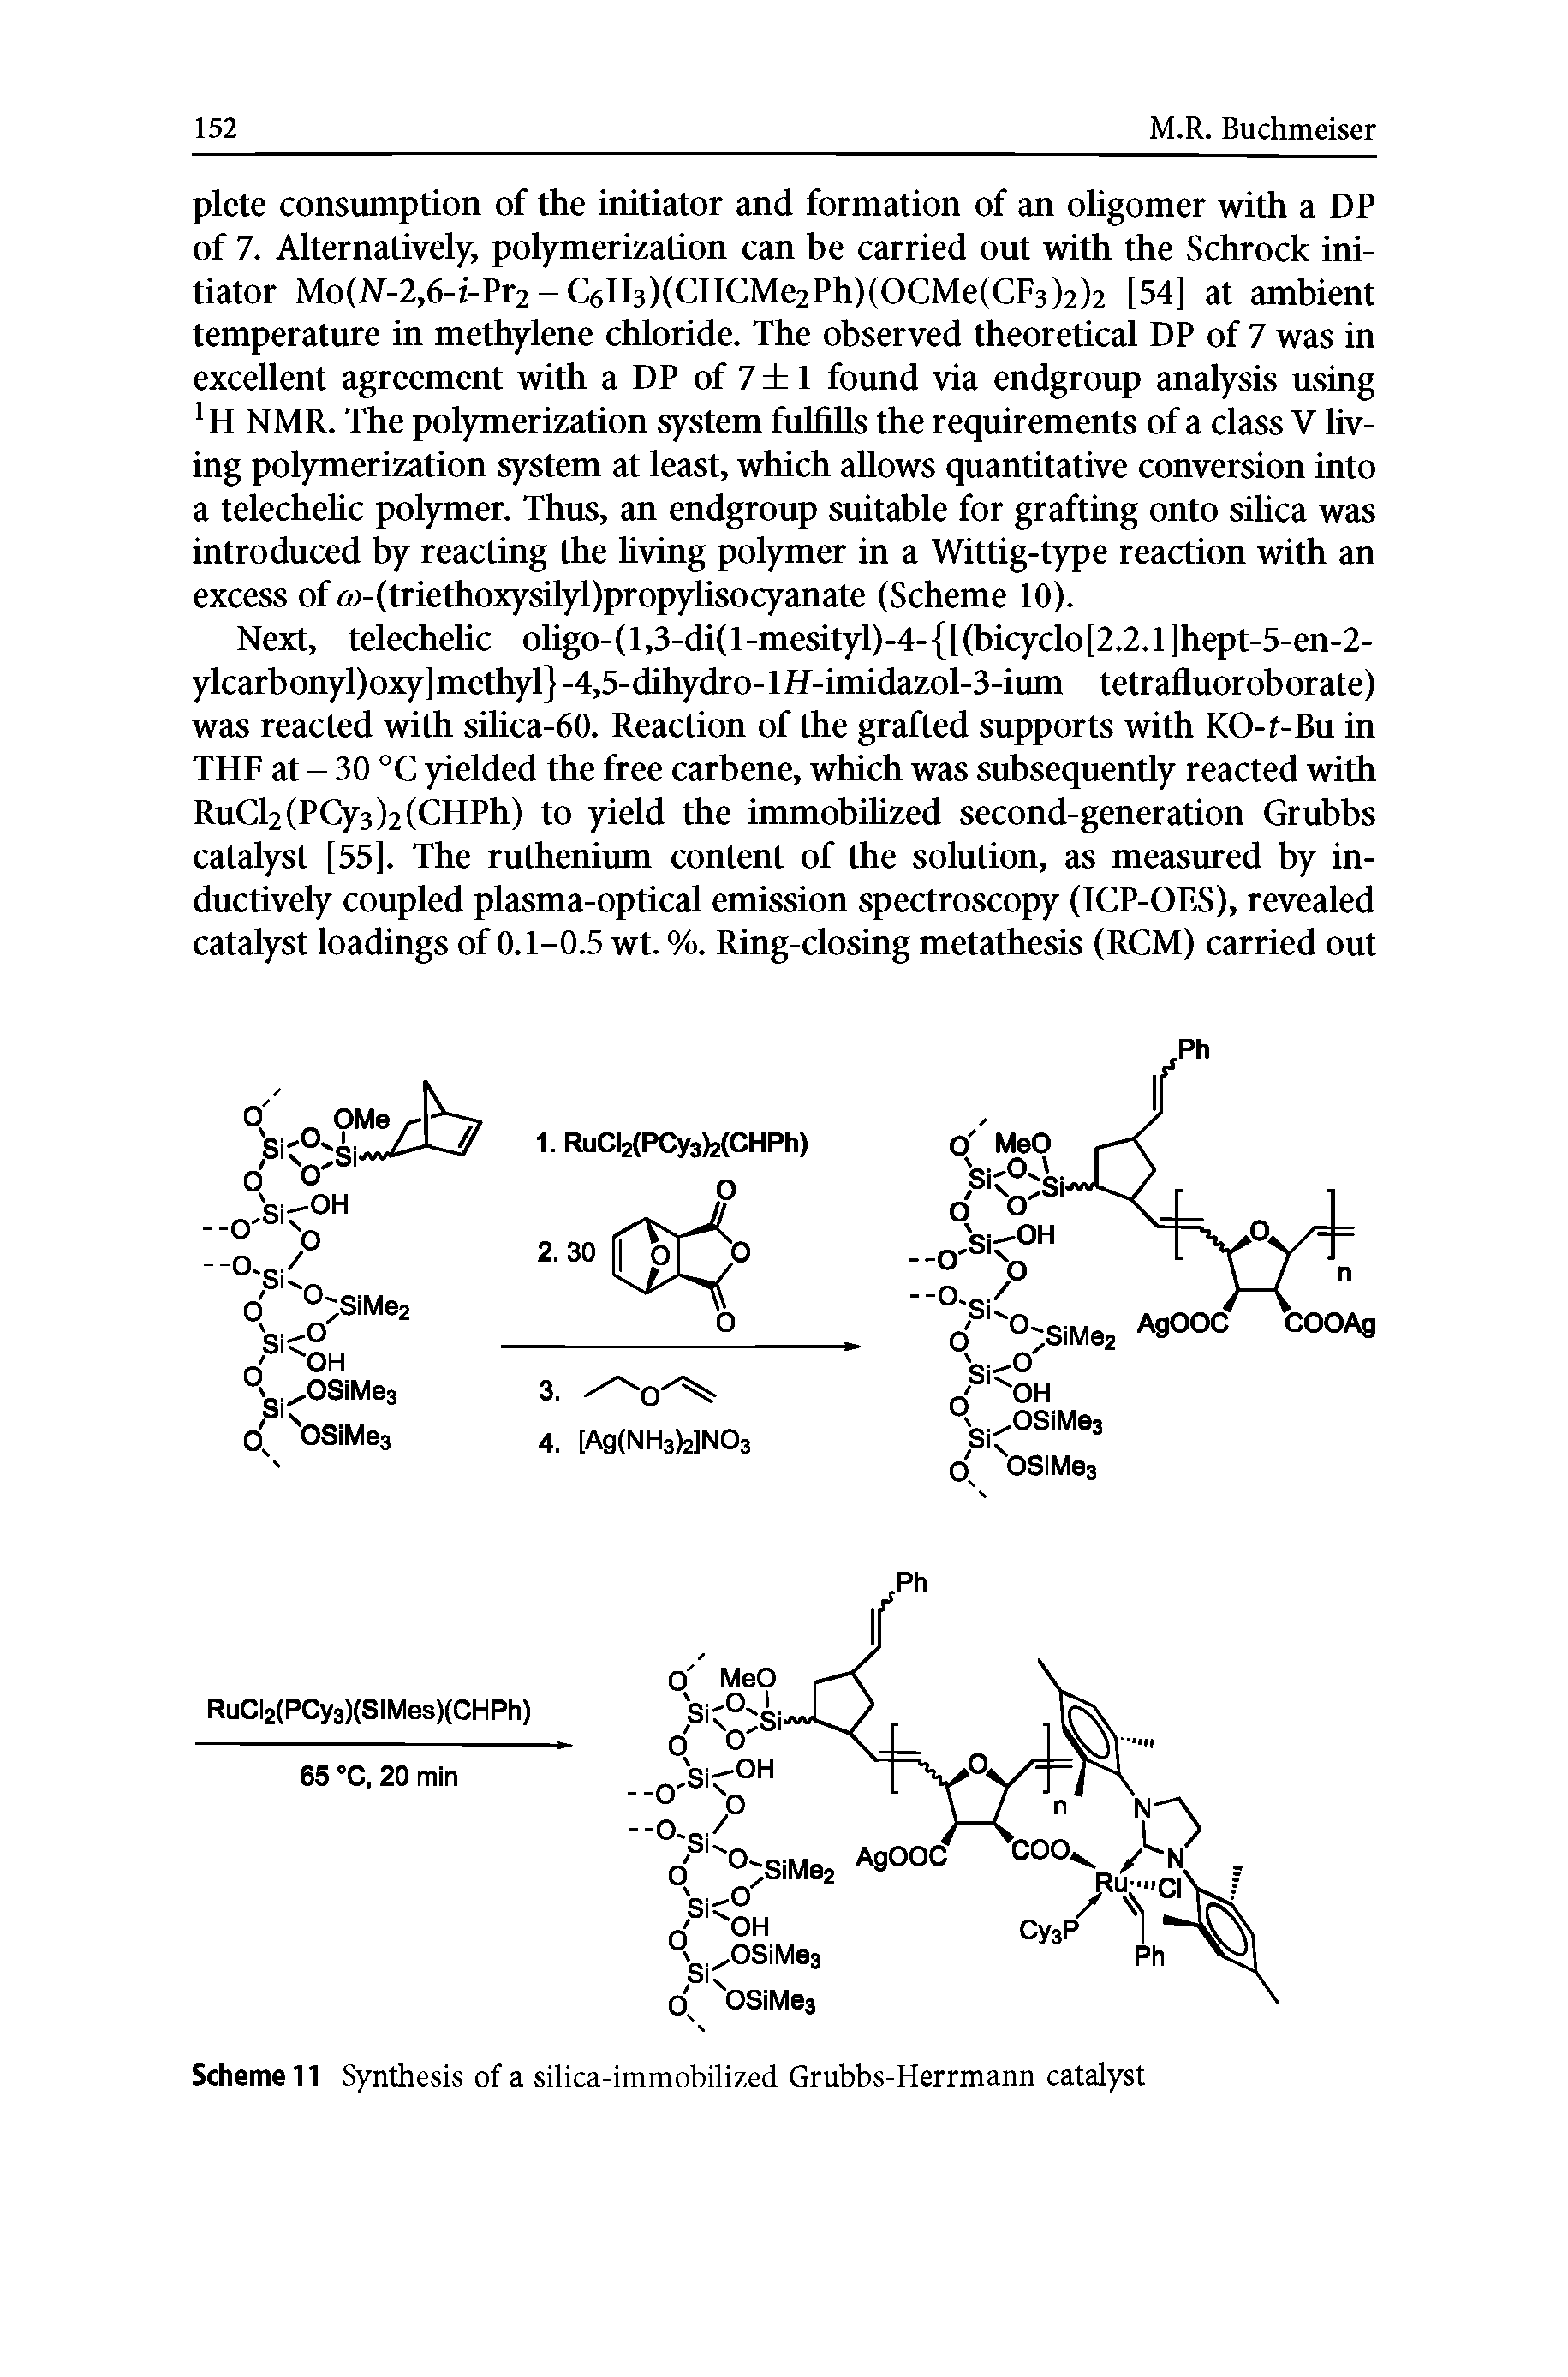 Scheme 11 Synthesis of a silica-immobUized Grubbs-Herrmann catalyst...